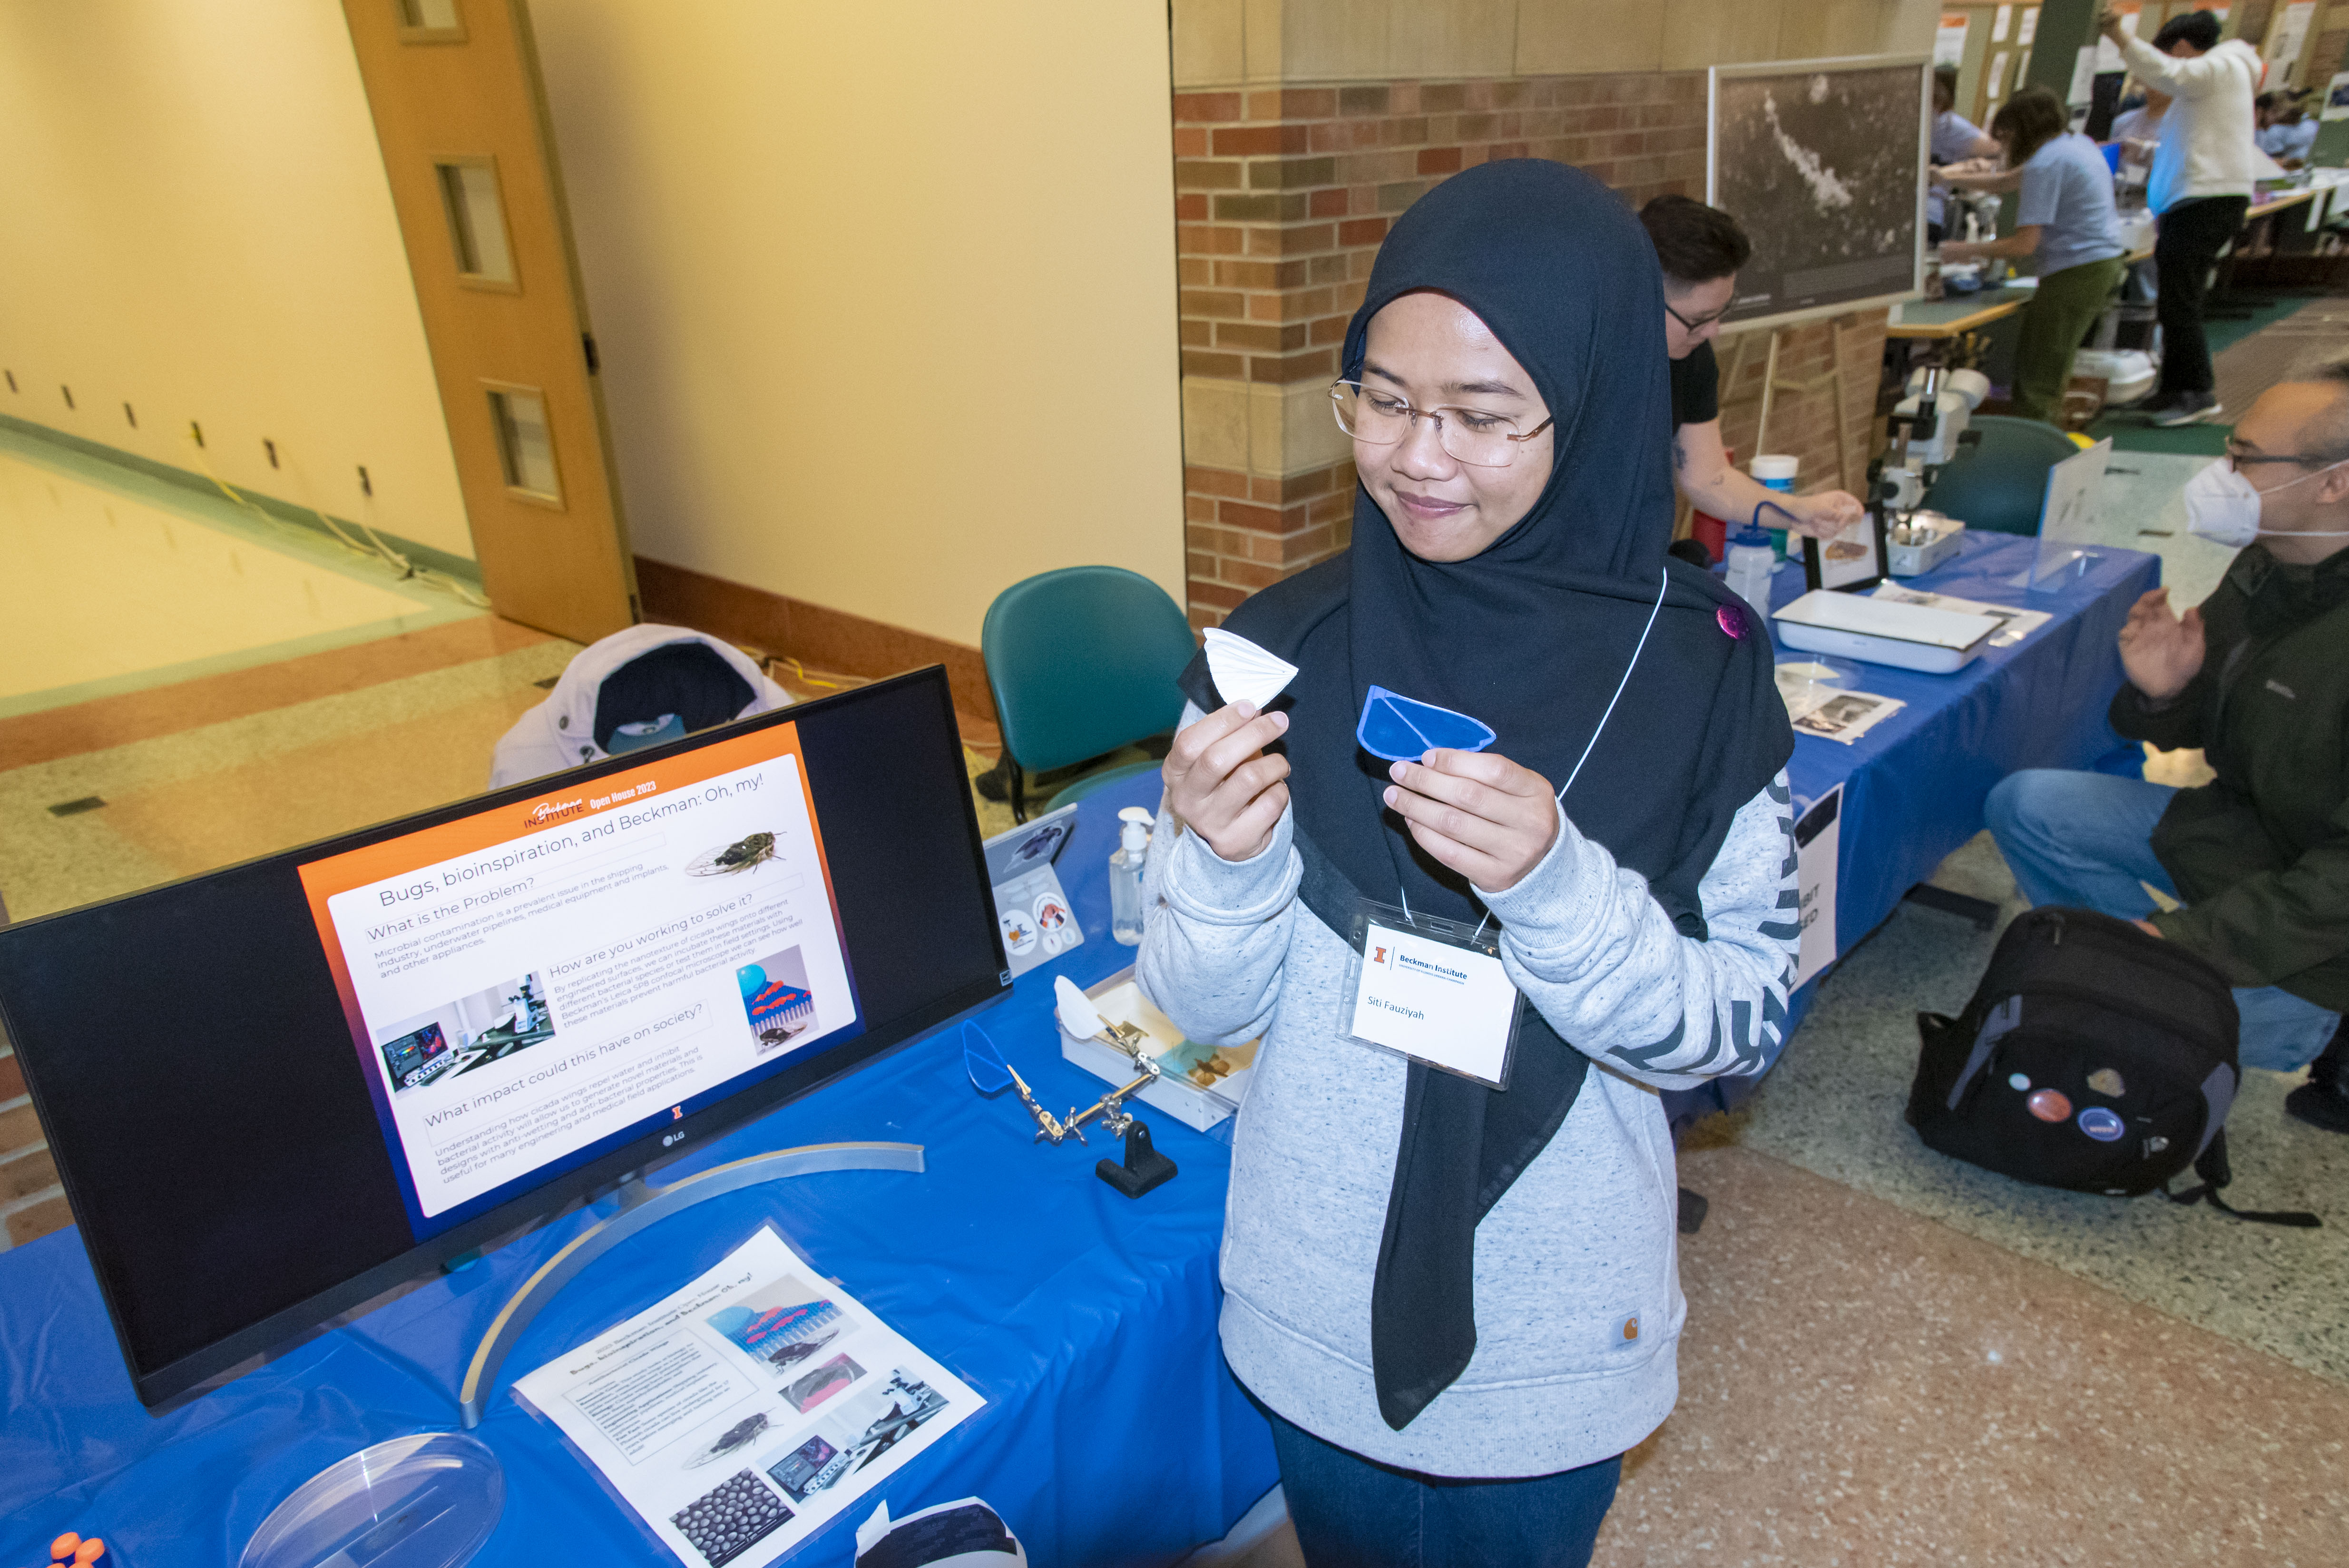 Siti Fauziyah presents an exhibit at the Beckman Institute Open House in 2023.